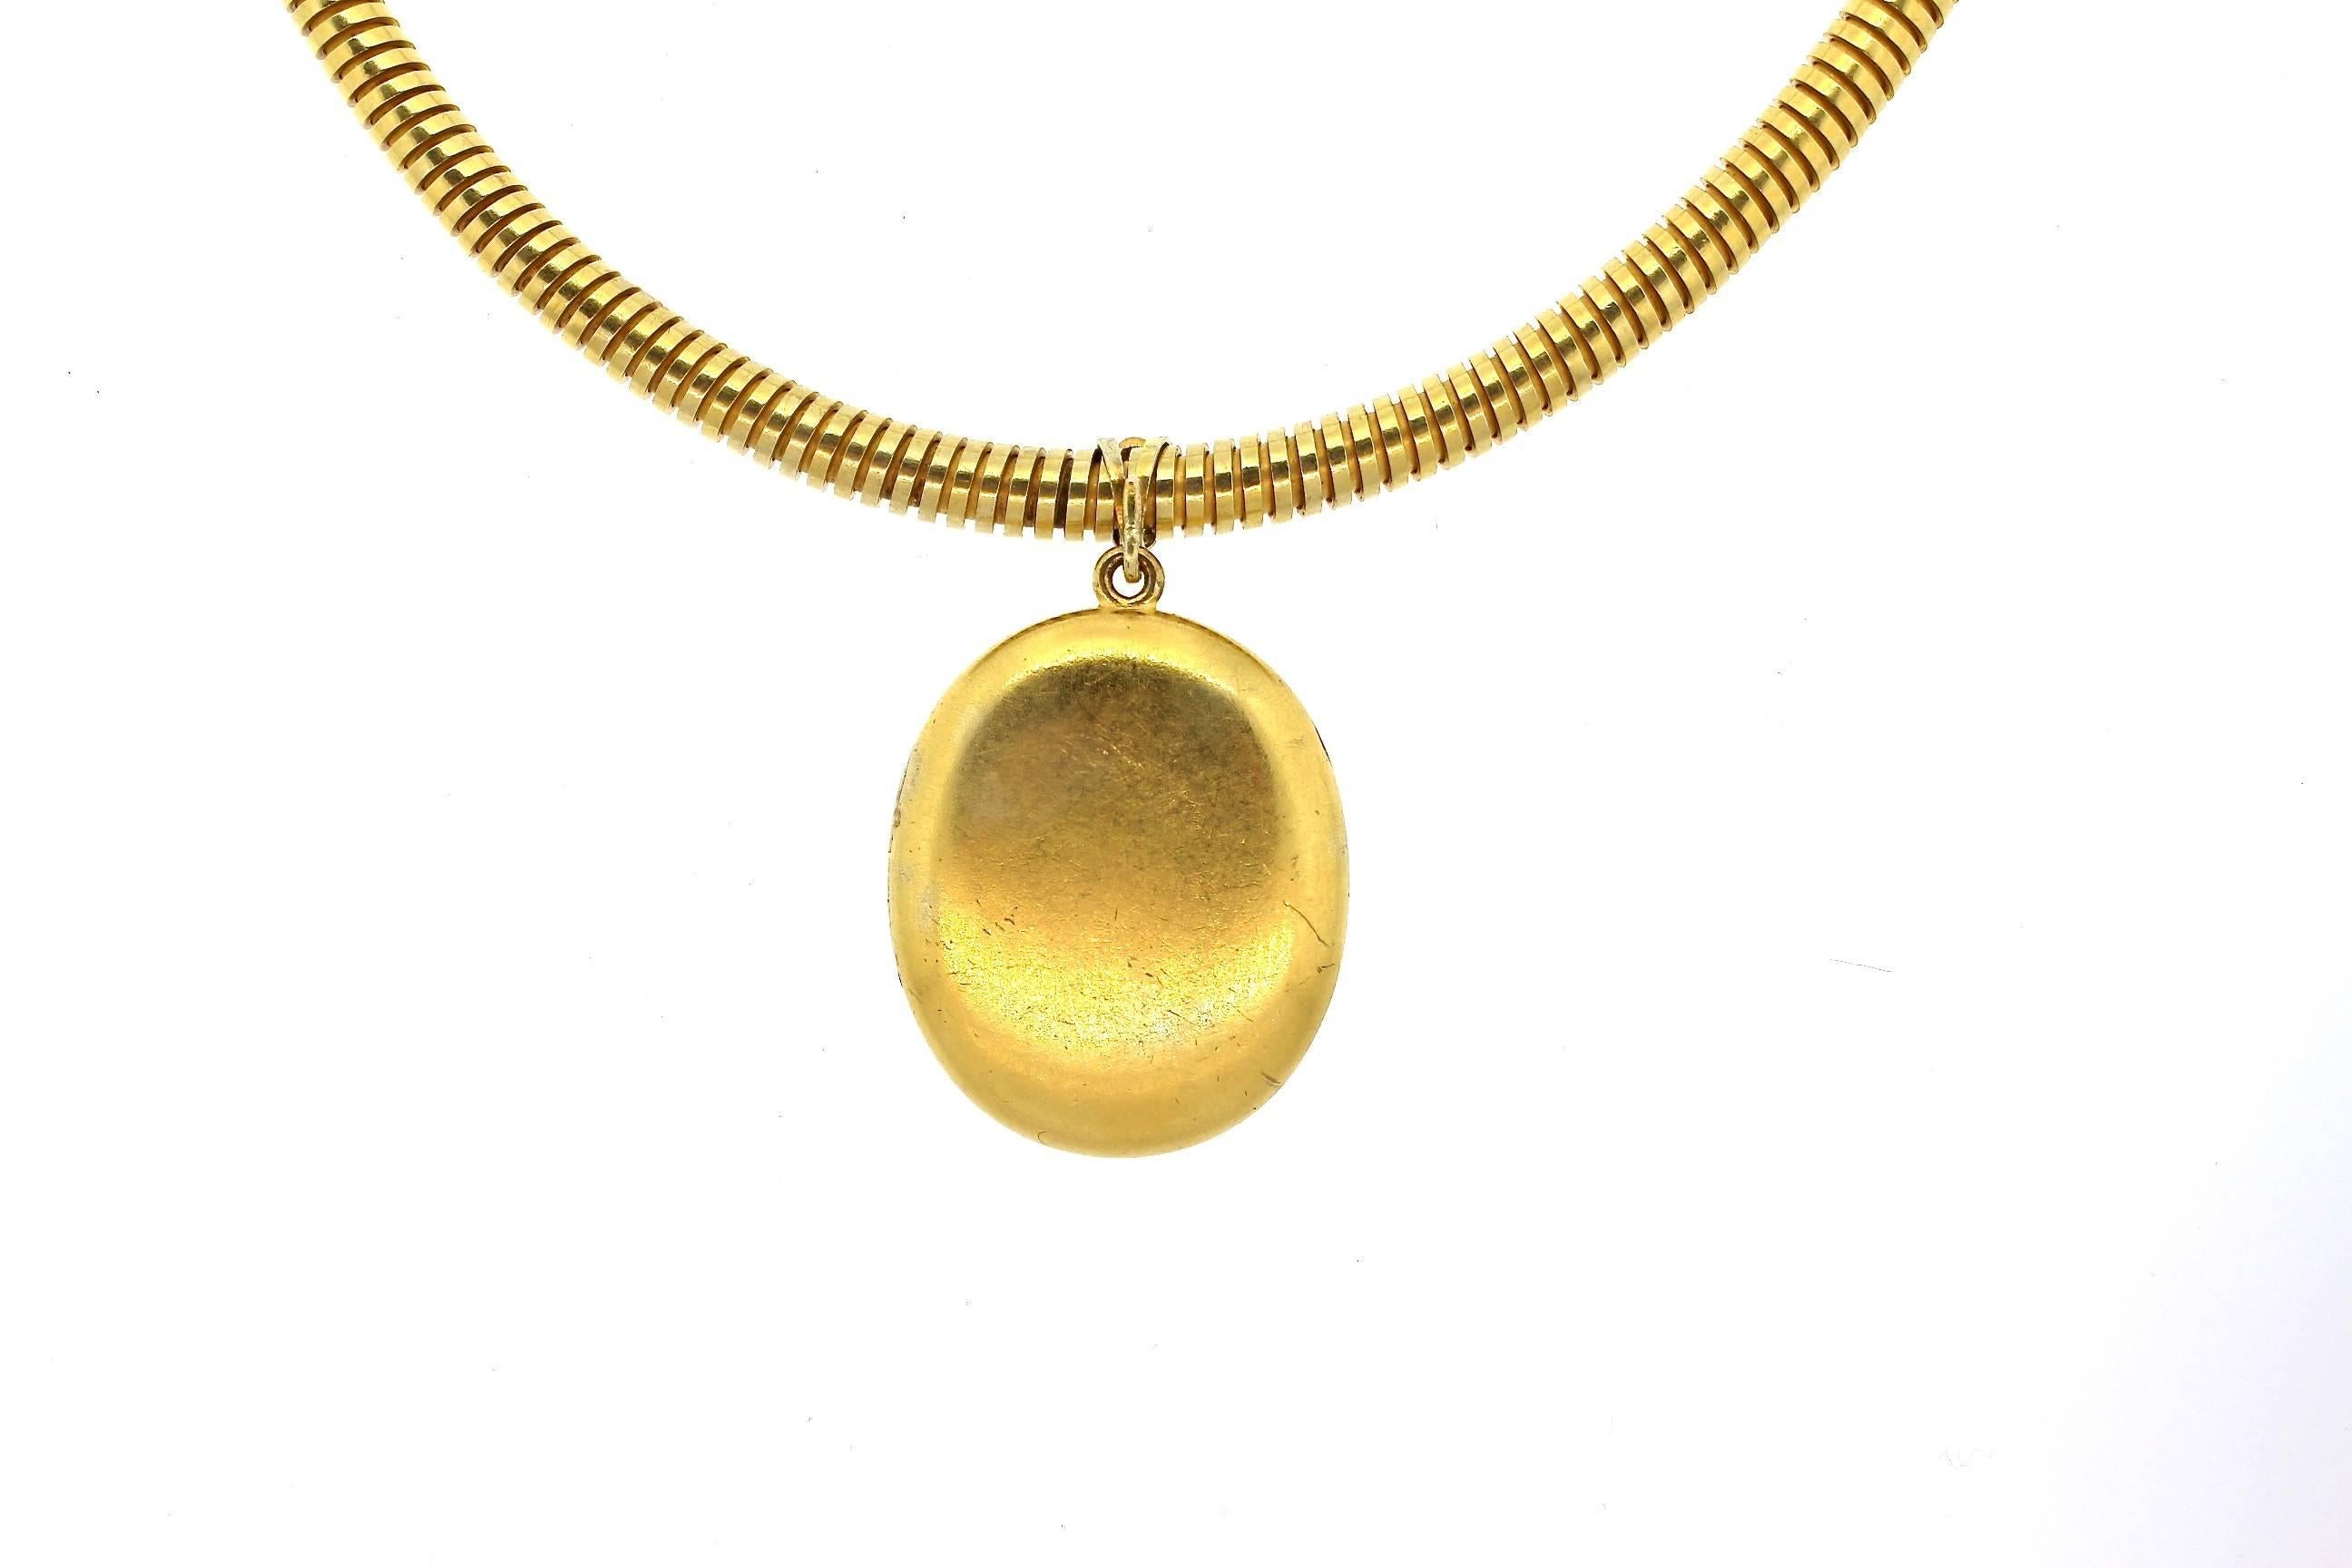 Original 14k gold gas pipe necklace suspending a locket with a ruby horseshoe made in Russia circa 1860.  The Russian maker is Leopold Karlovich who was a Russian Court jeweler in the 1850s and 1860s.  Though a little known maker, he indeed made